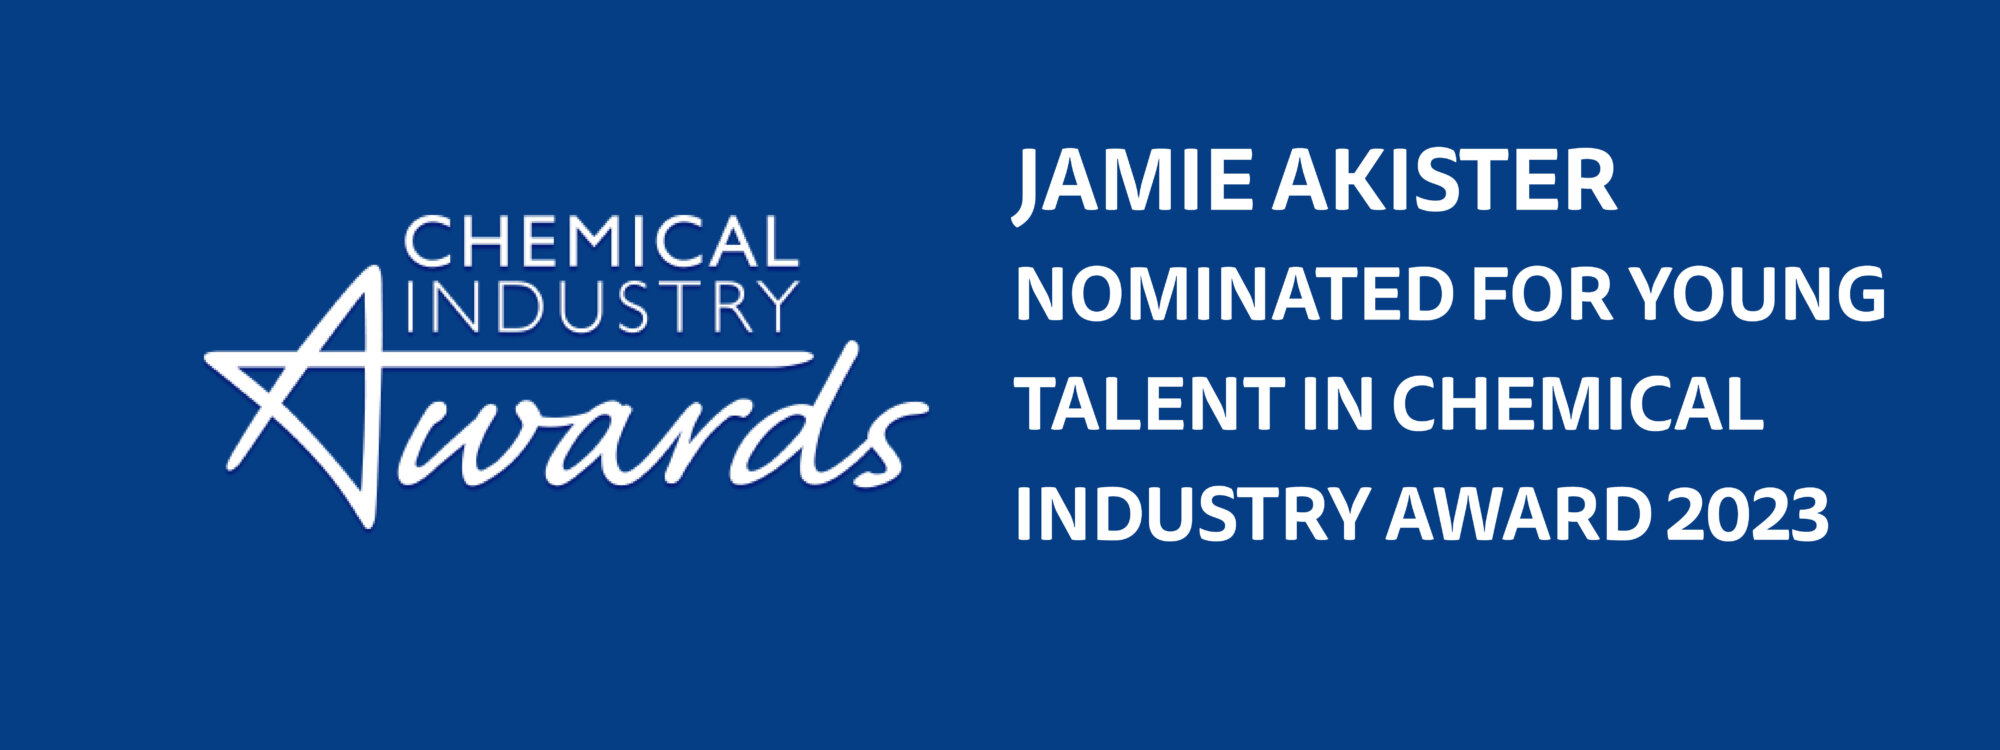 Scott Bader UK’s Jamie Akister nominated for Young Talent in the Chemical Industry Award 2023